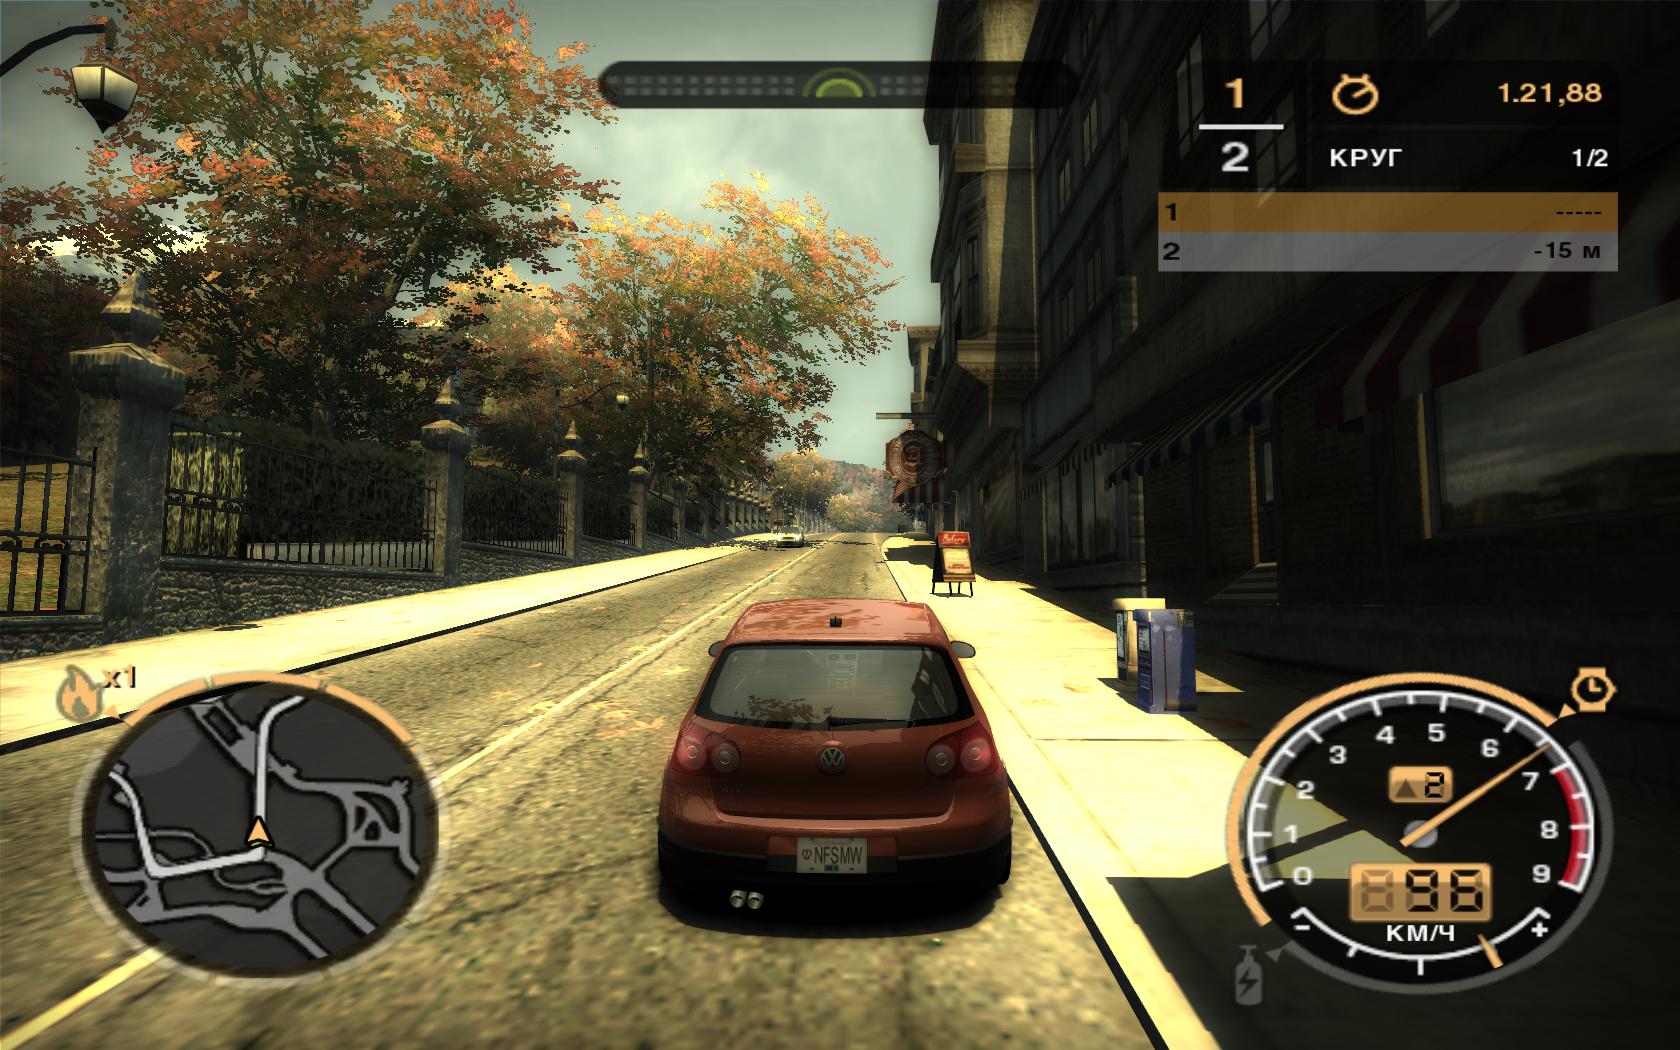 NFS most wanted 2005. Новый NFS most wanted 2005. Нфс most wanted 2005 на телефон. Need for Speed 2005 на андроид.